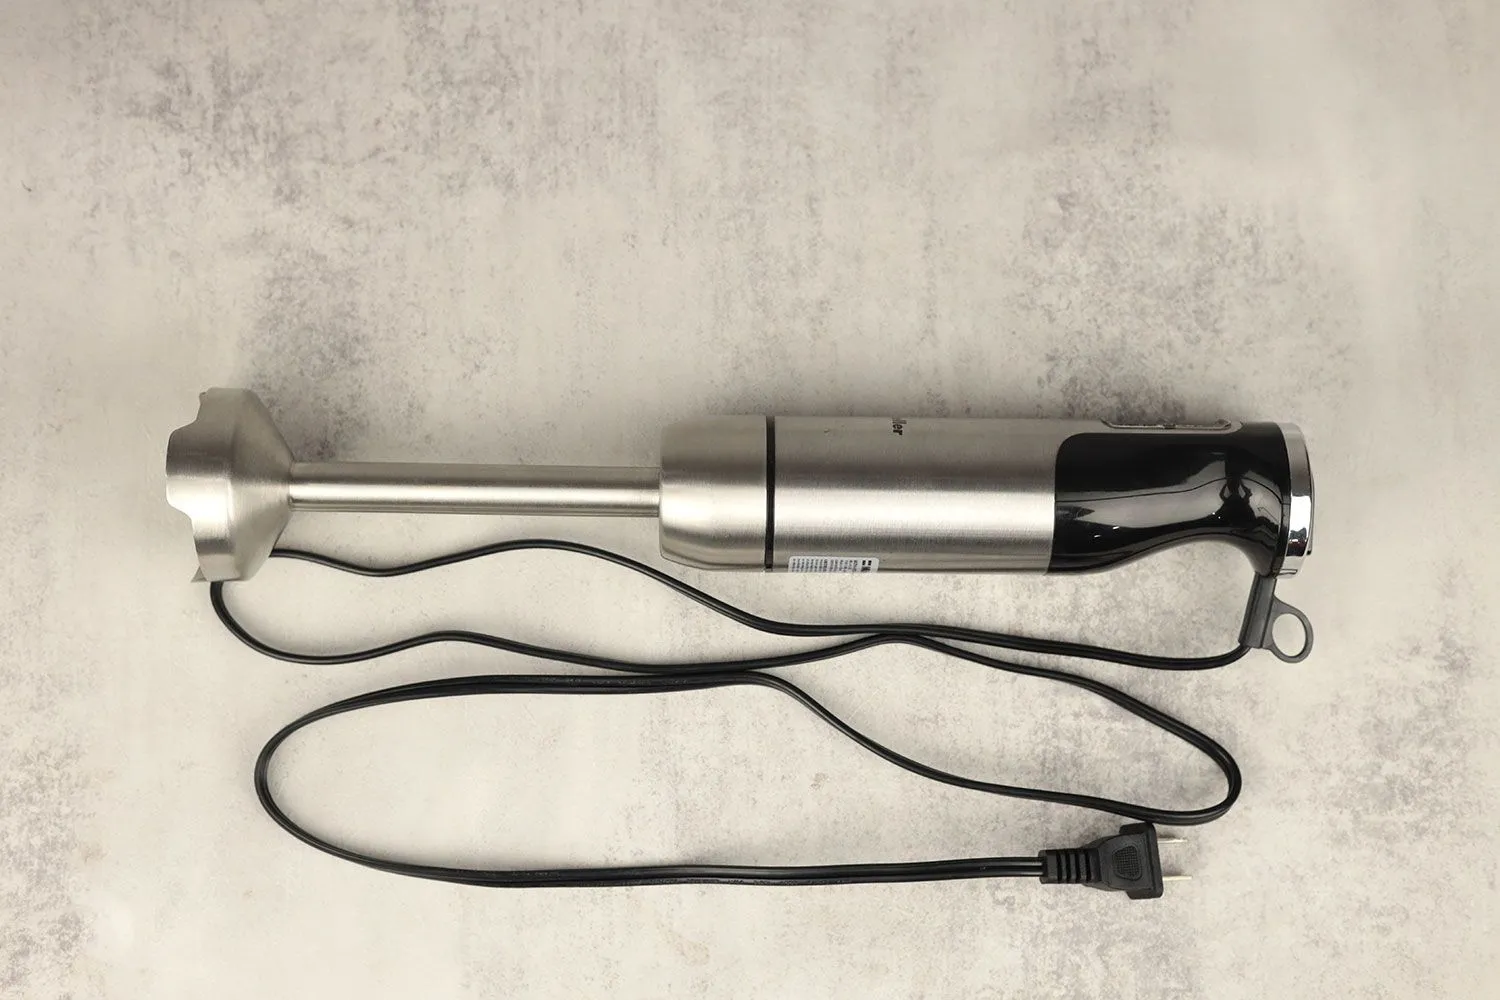 Mueller Immersion Hand Blender Review and Unboxing 